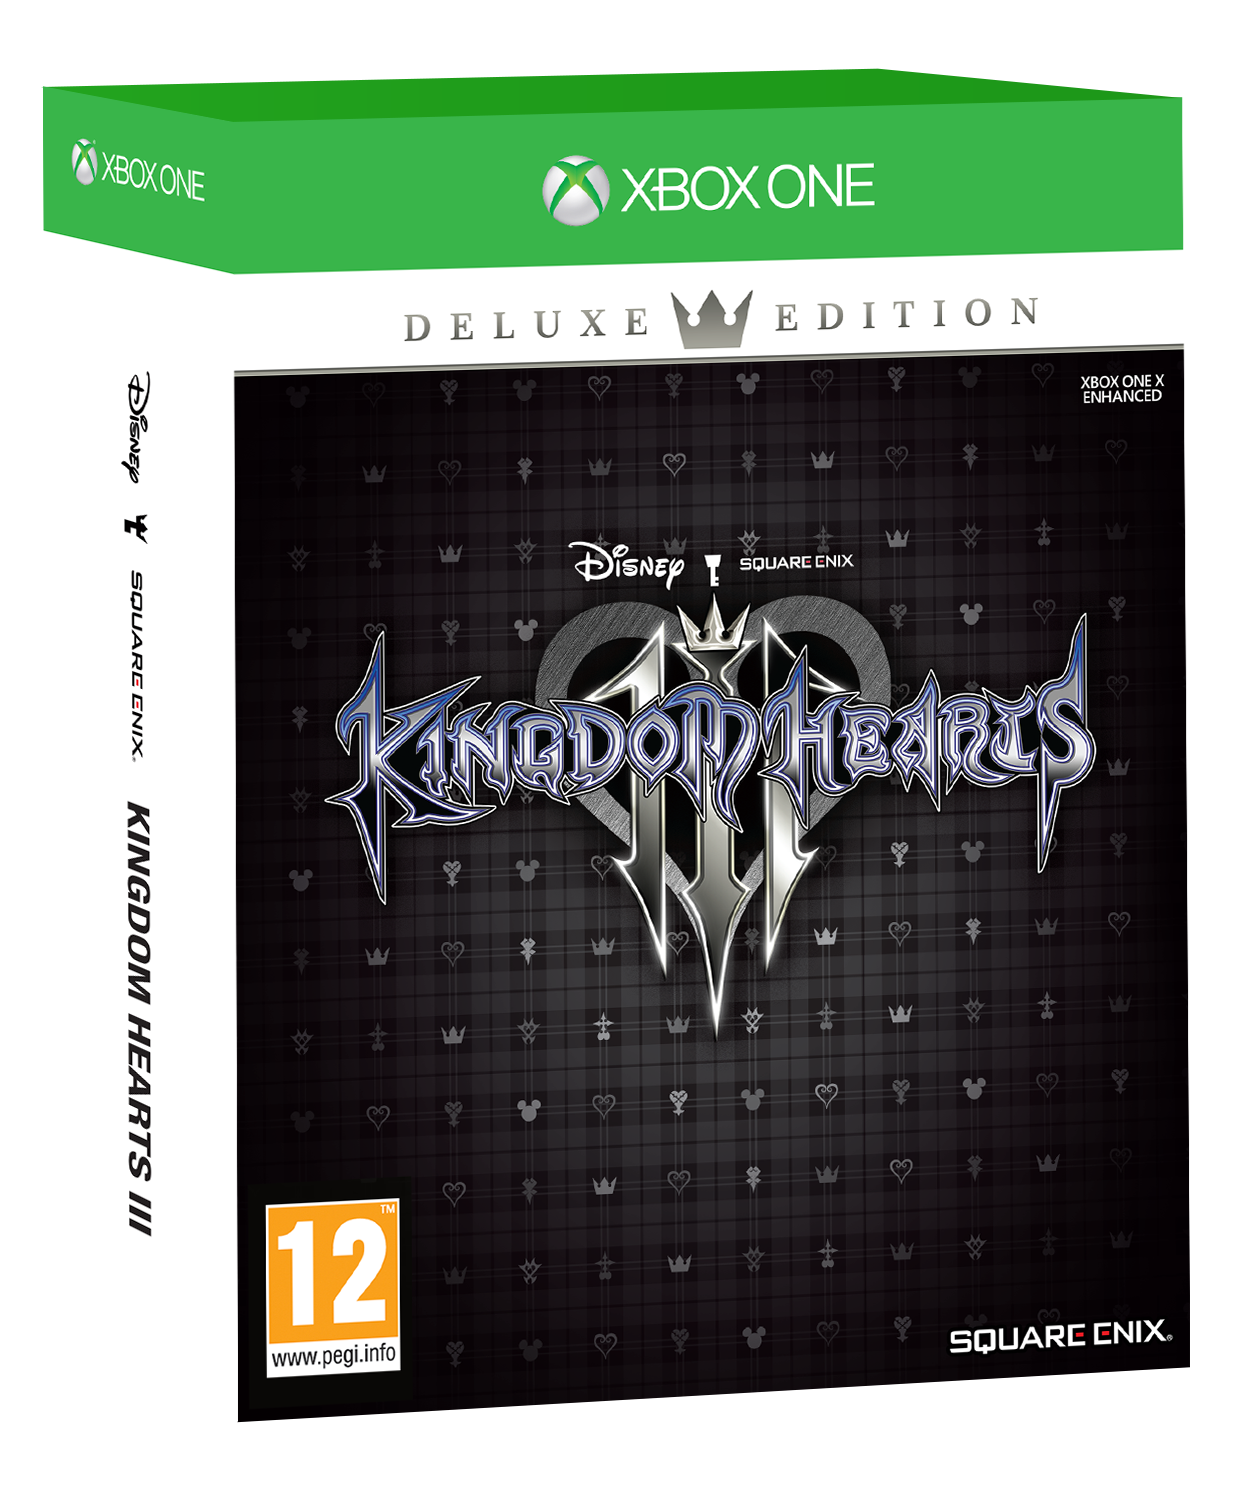 will kingdom hearts 3 deluxe edition come with dlc